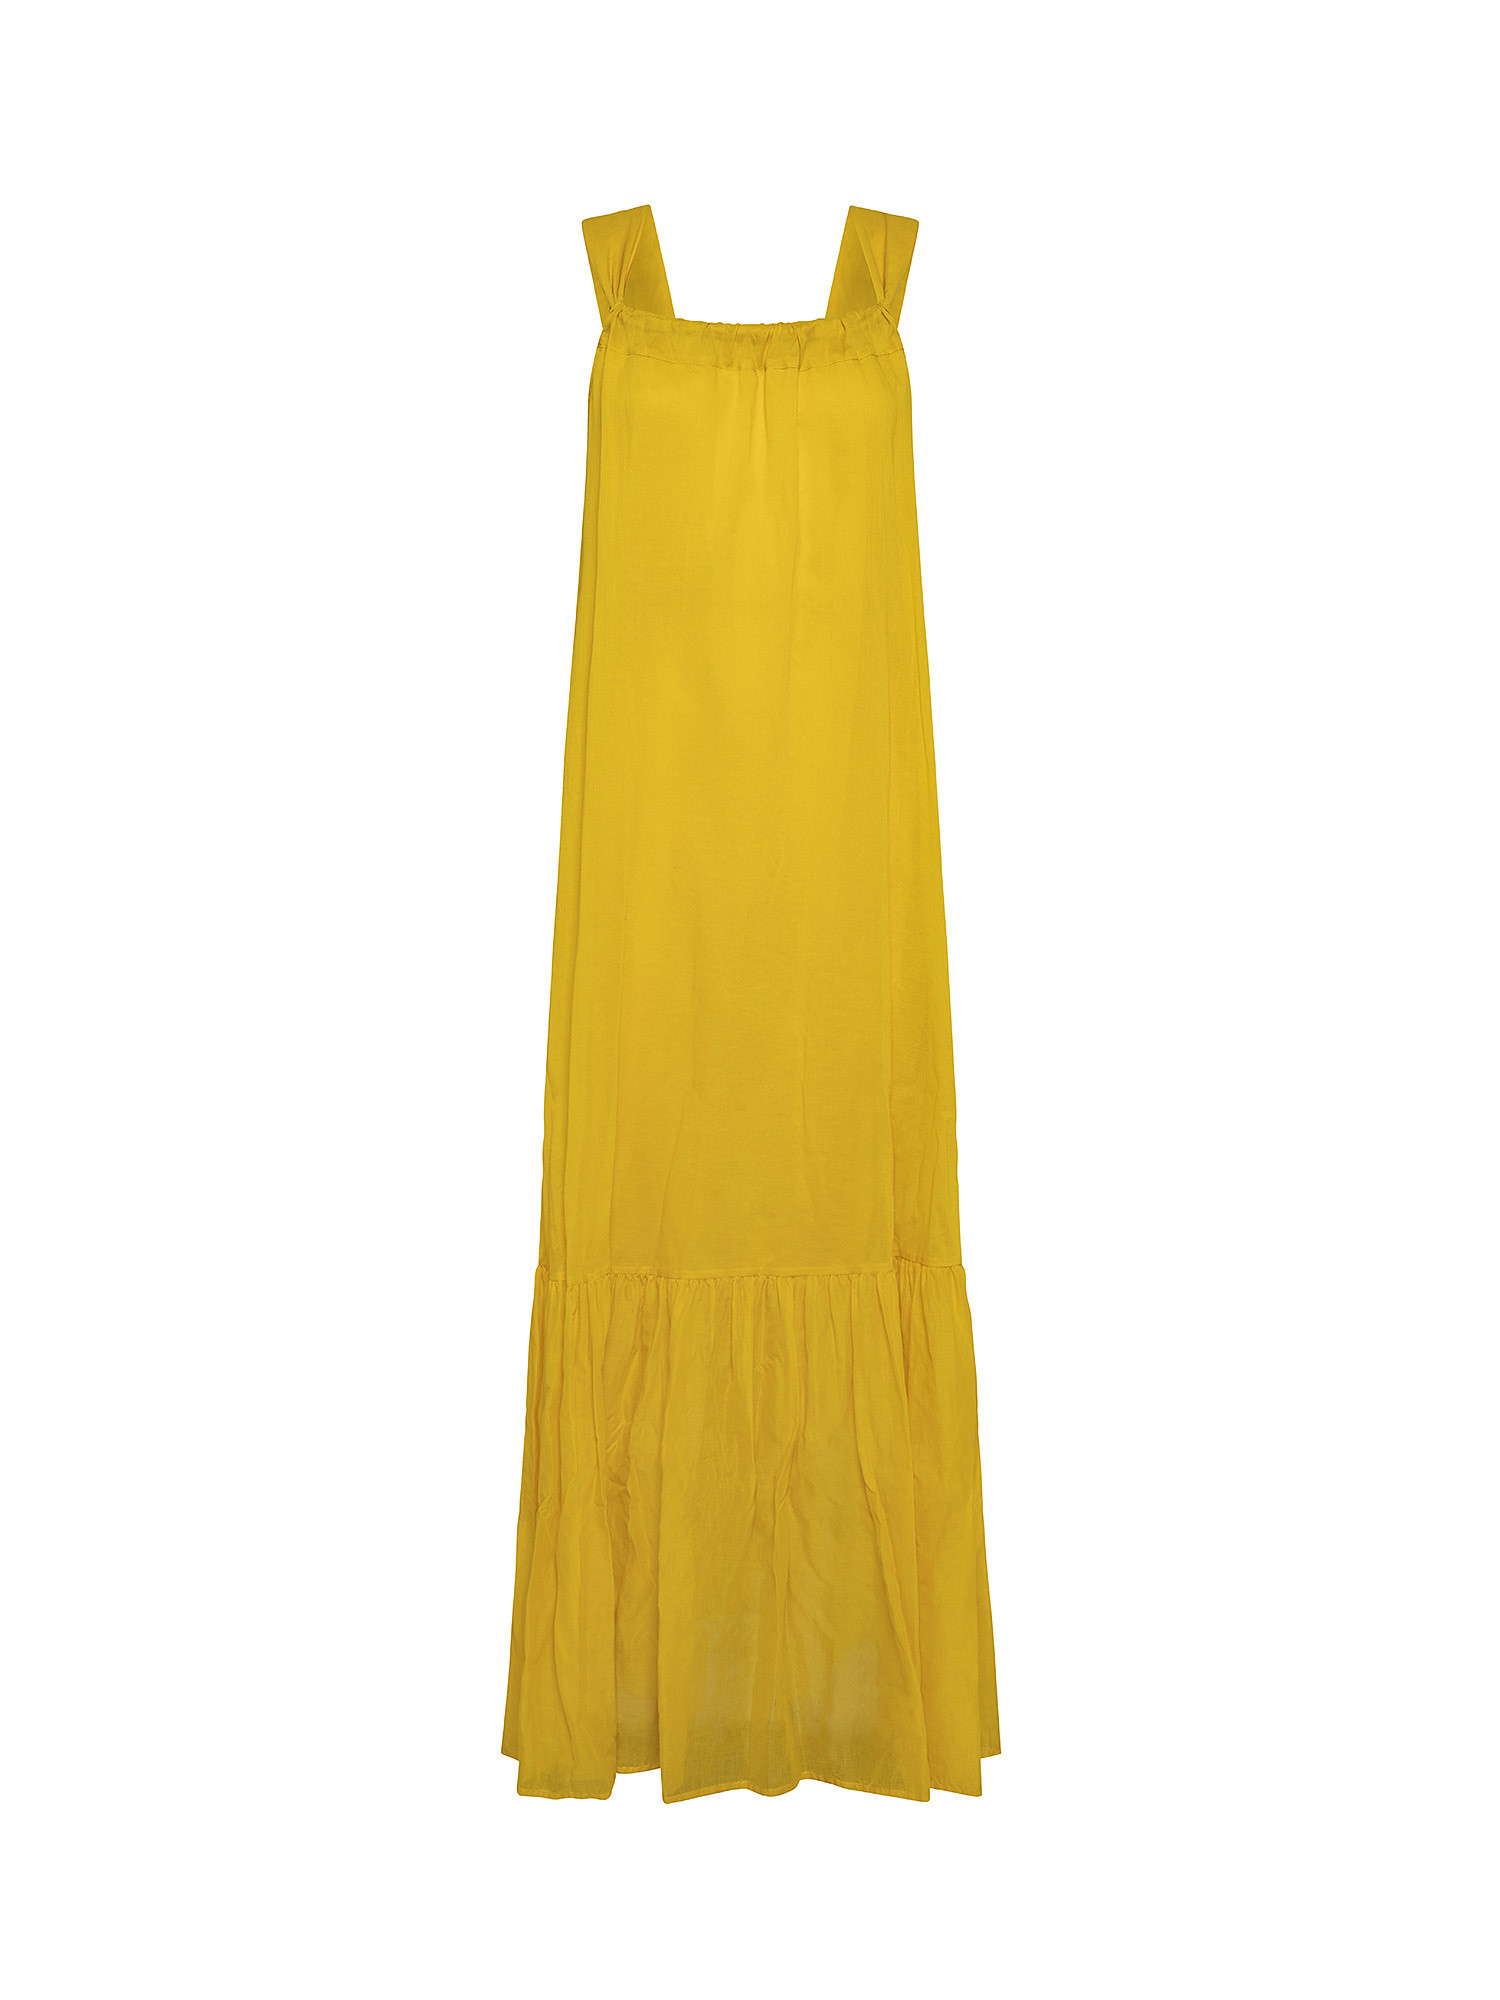 Lexington dress in cotton voile, Yellow, large image number 0